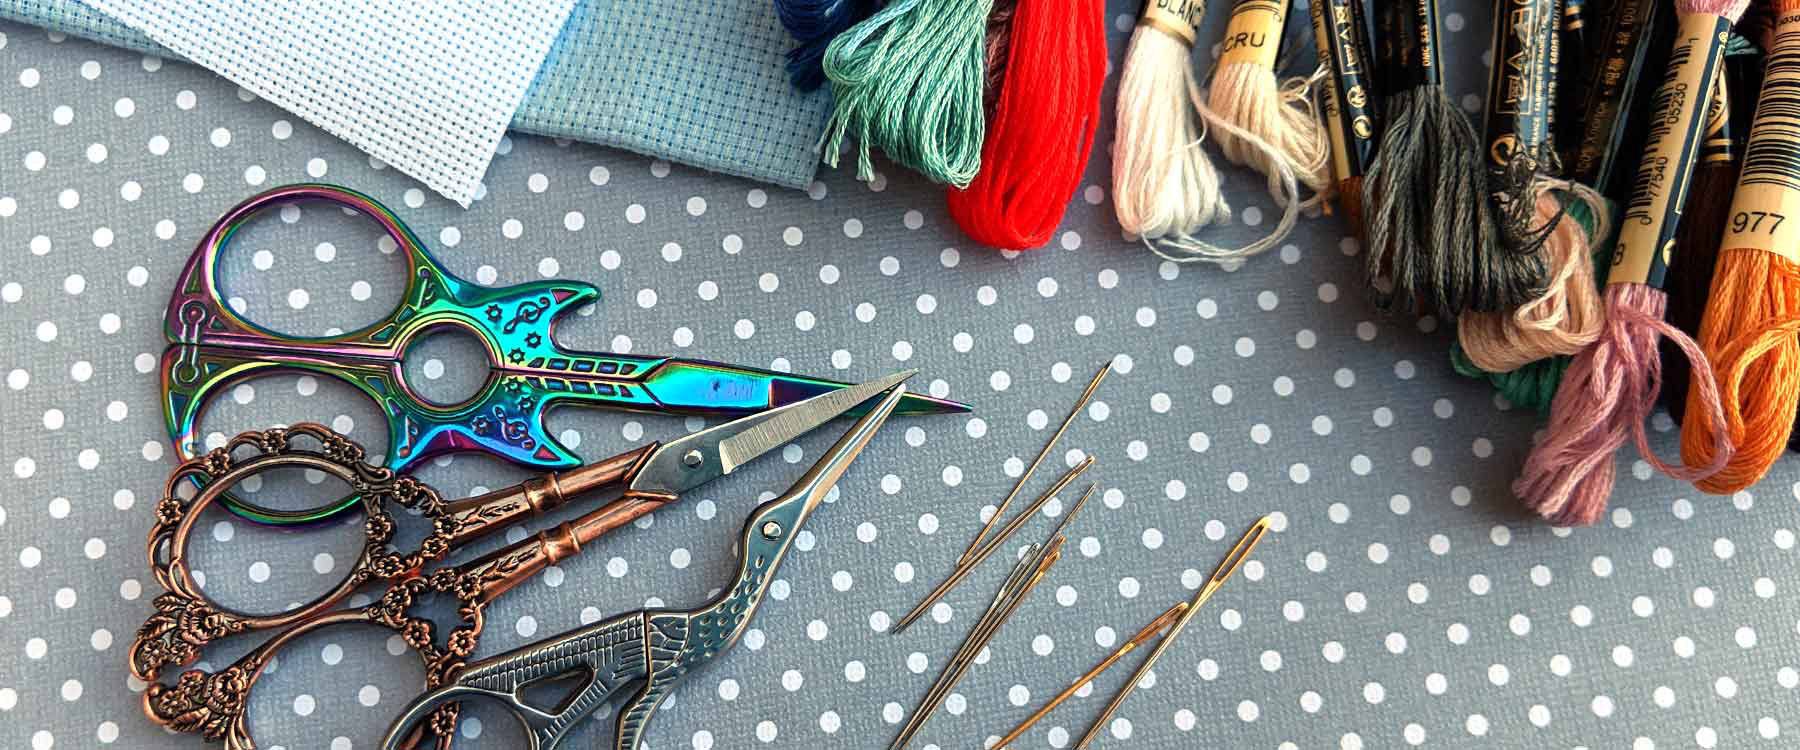 Cross-Stitch 101 - Lesson 1: Tools and Materials Before You Start